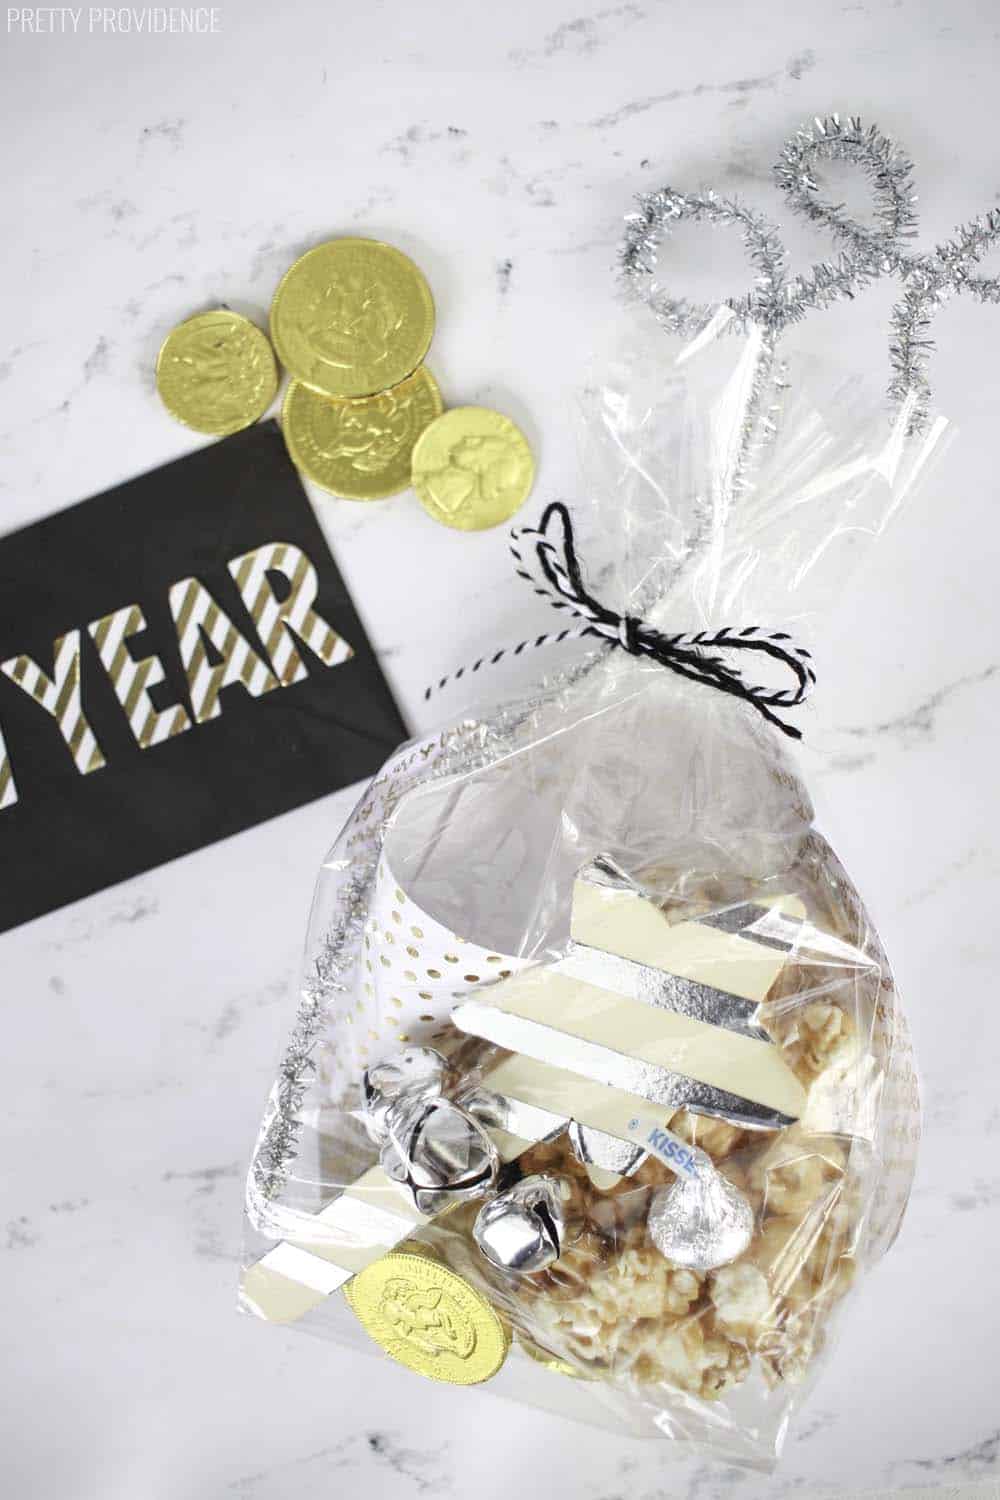 These New Year's Eve goodie bags are simple, fun and good for kids or adults! Filled with treats and noisemakers for NYE fun!